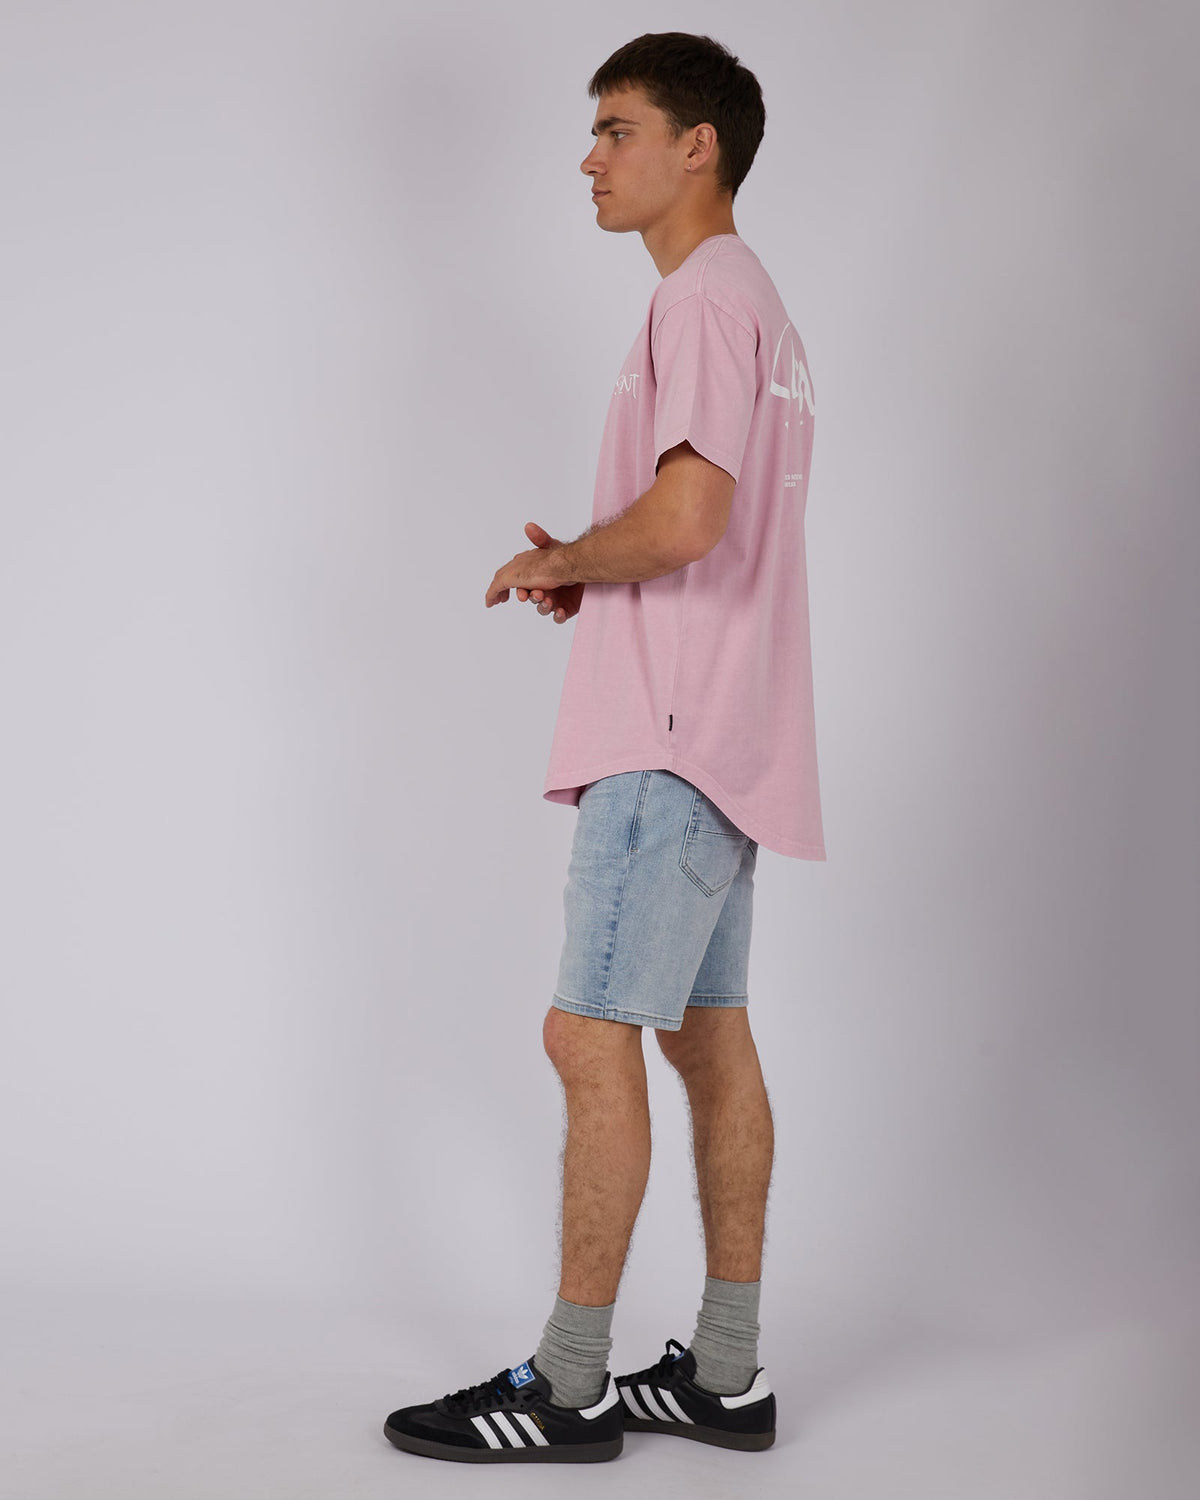 Silent Theory-Jagger Tee Pink-Edge Clothing